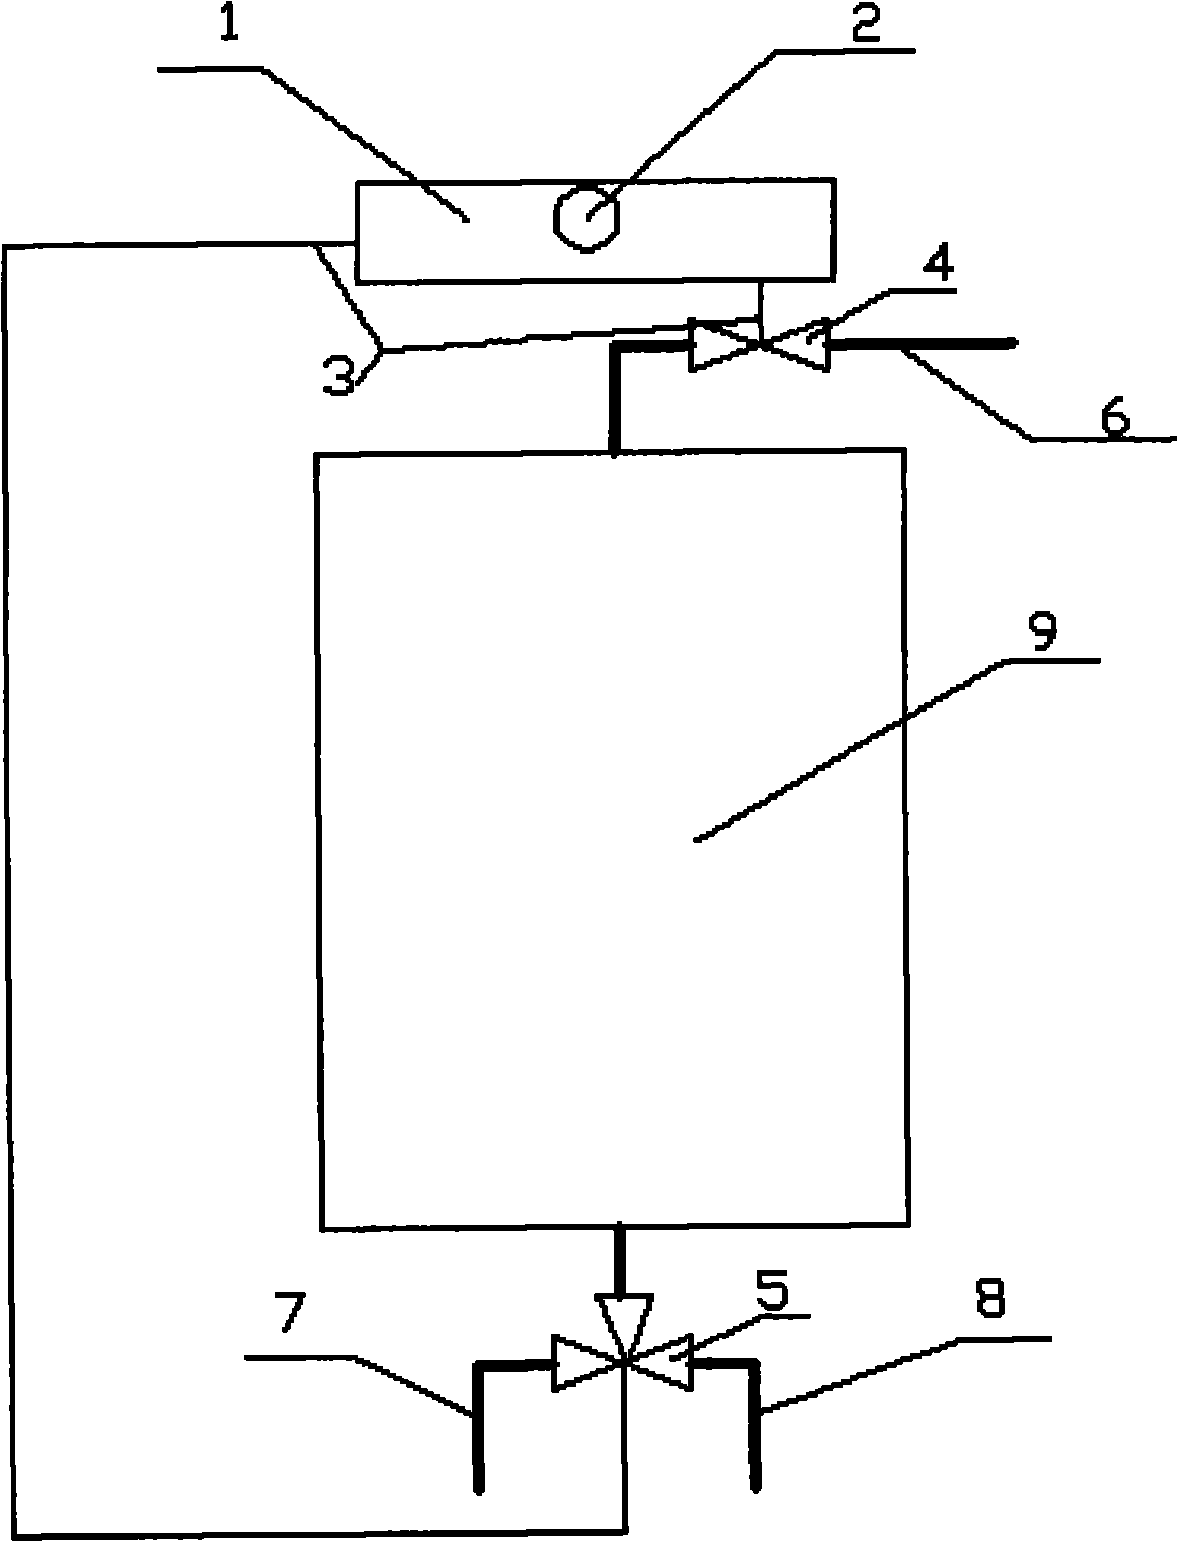 Equipment capable of automatically separating and collecting urine in urinal